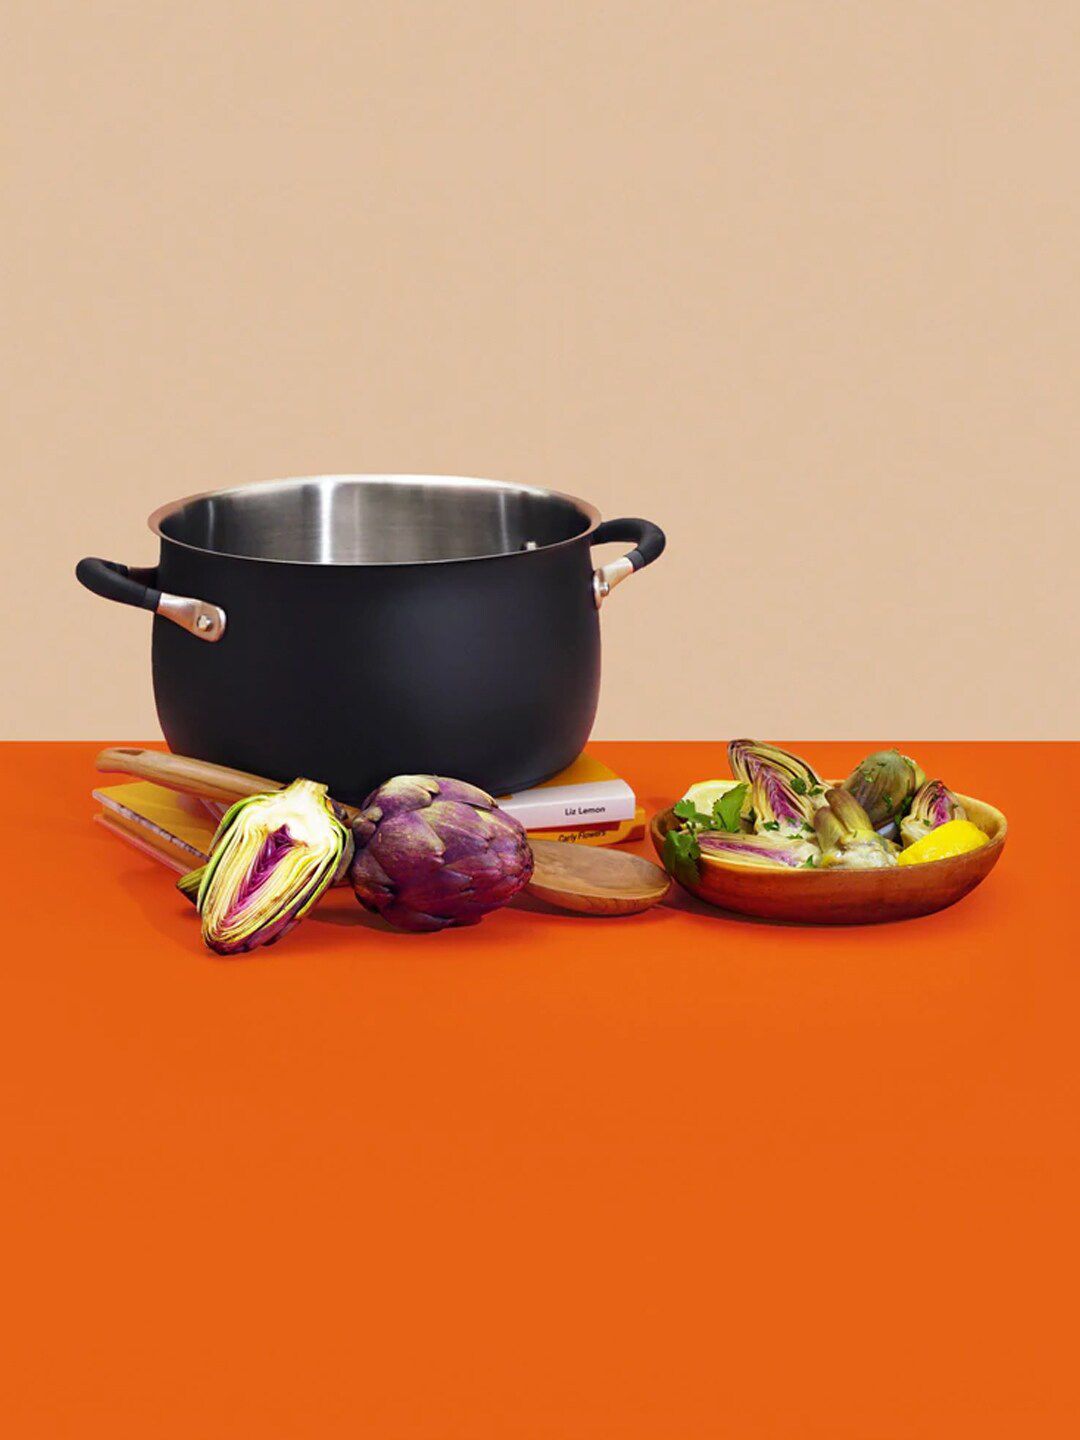 MEYER Black Solid Stainless Steel Stockpot Cookware With Handles - 7.6 Litres Price in India